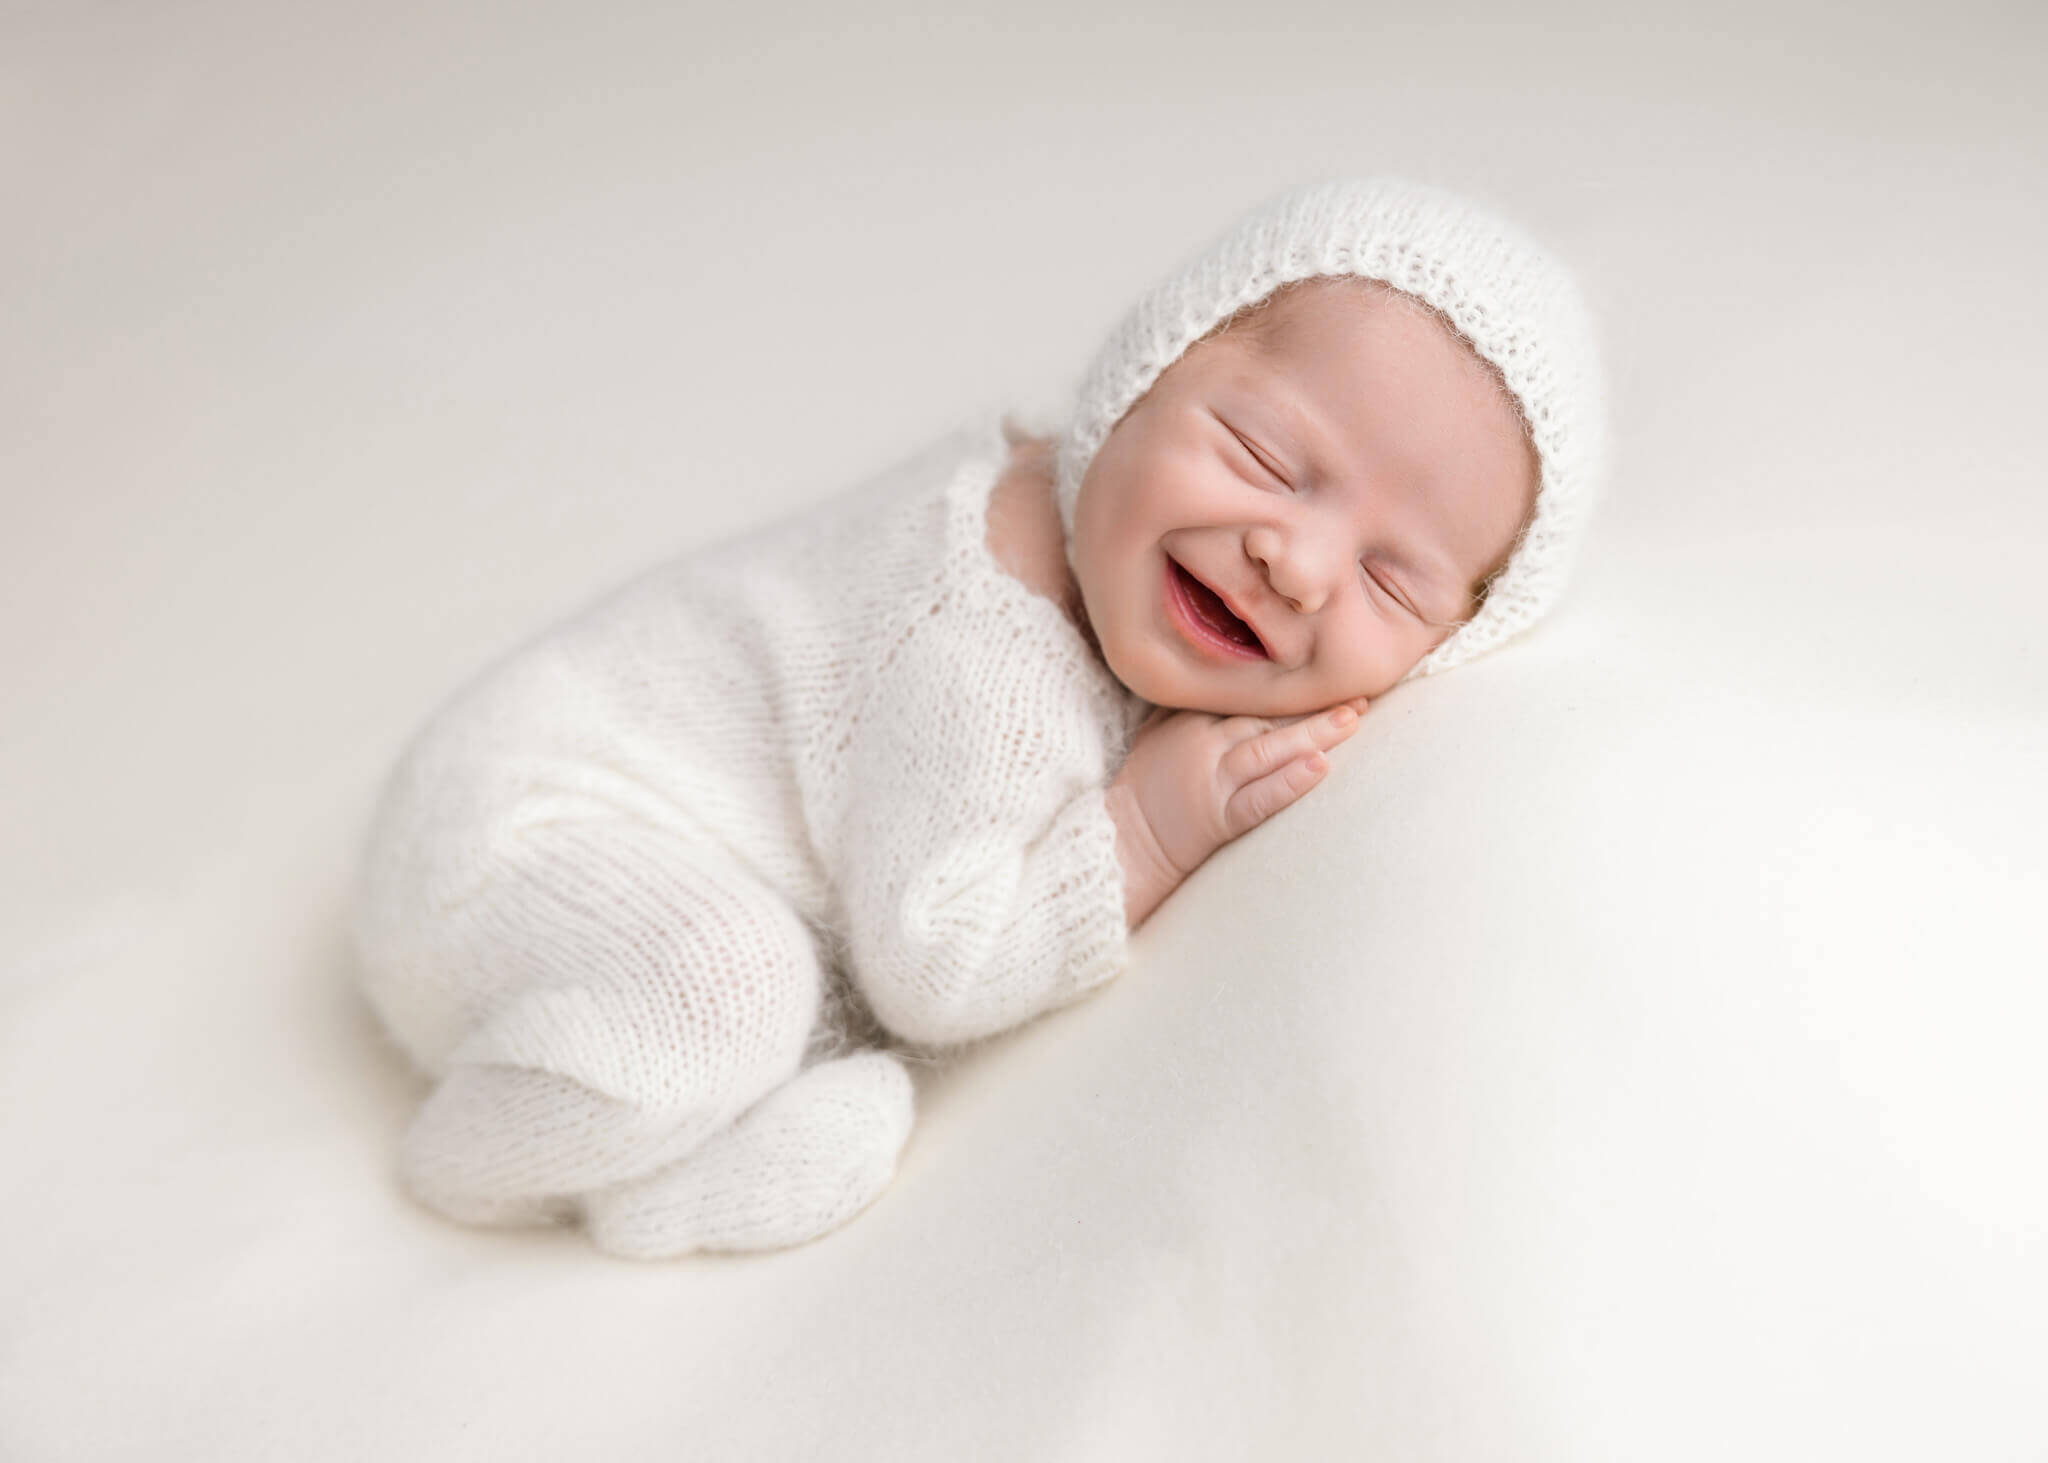 newborn baby in white romper with a white bonnet sleeping on a her side on a white blanket